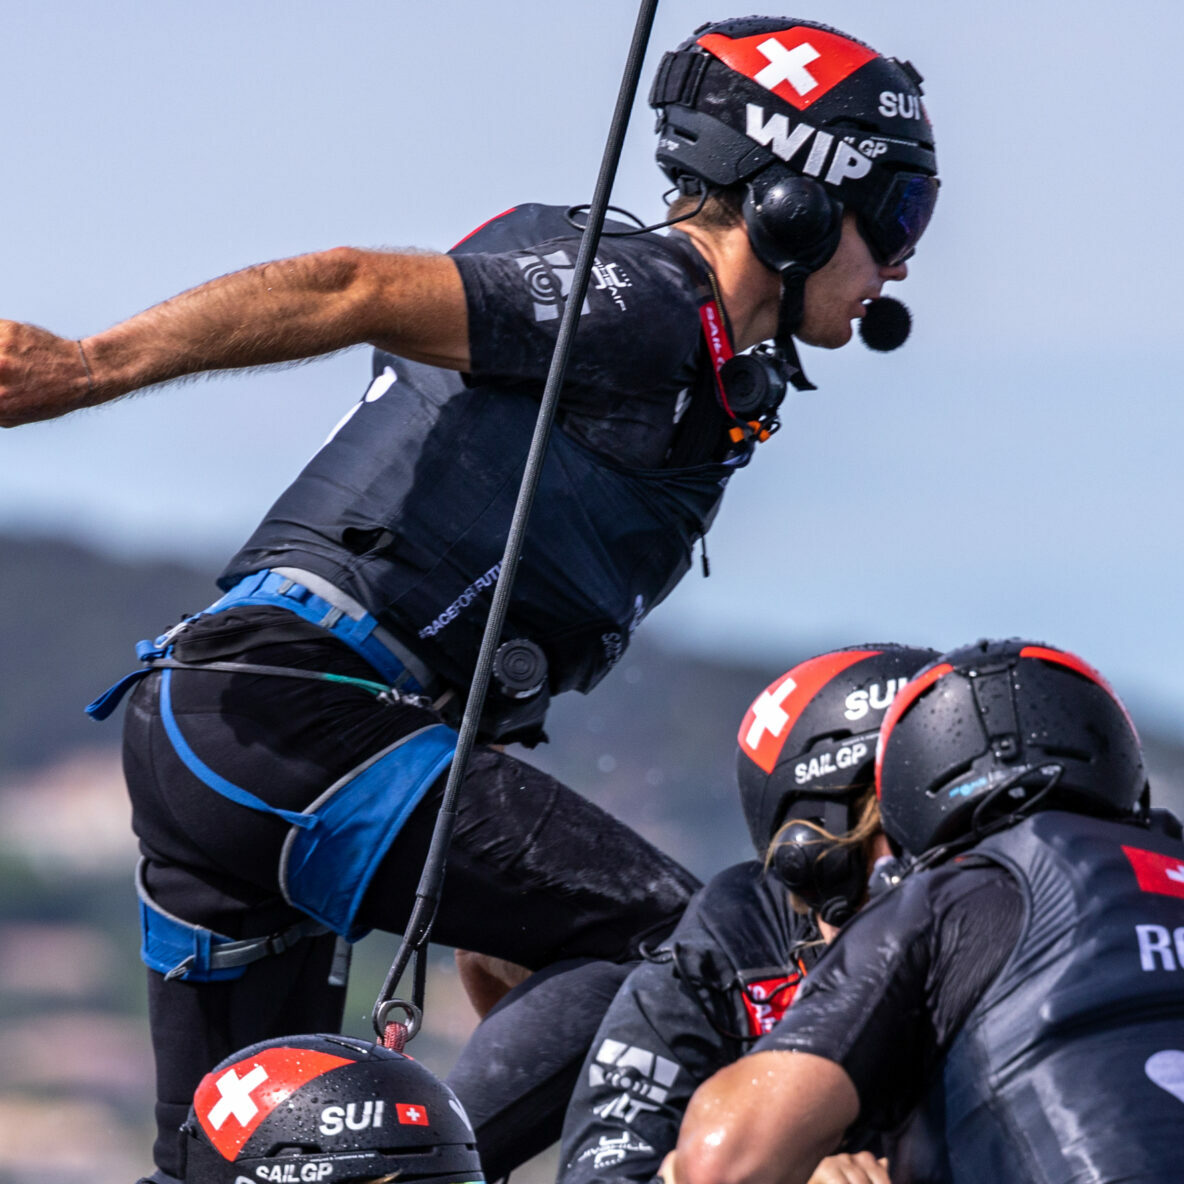 Sebastien Schneiter, driver of Switzerland SailGP Team, runs across the boat during a practice session ahead of the Range Rover France Sail Grand Prix in Saint Tropez, France. 8th September 2022. Photo: David Gray for SailGP. Handout image supplied by SailGP